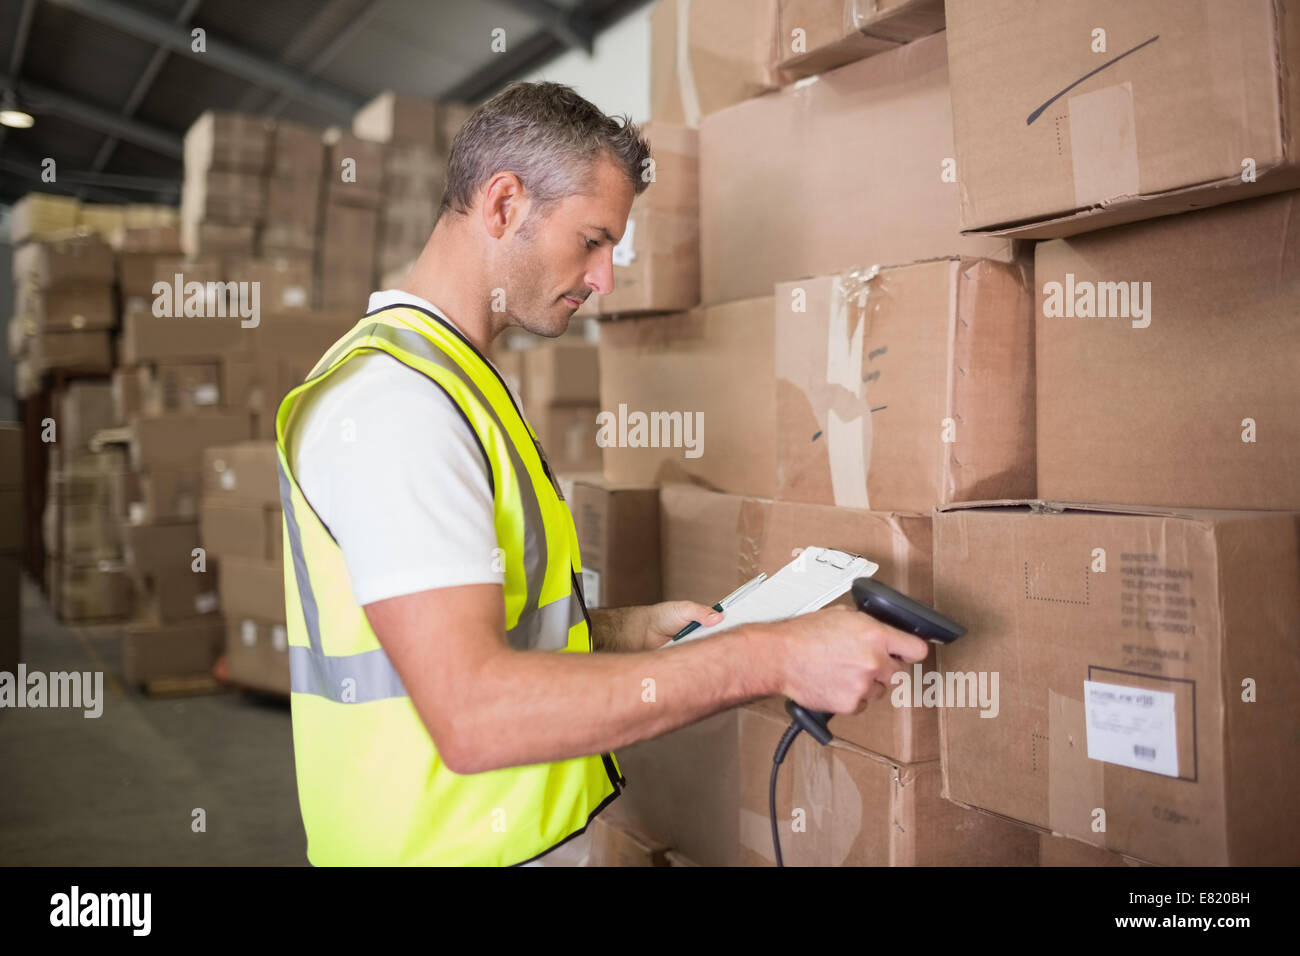 Worker scanning package in warehouse Stock Photo